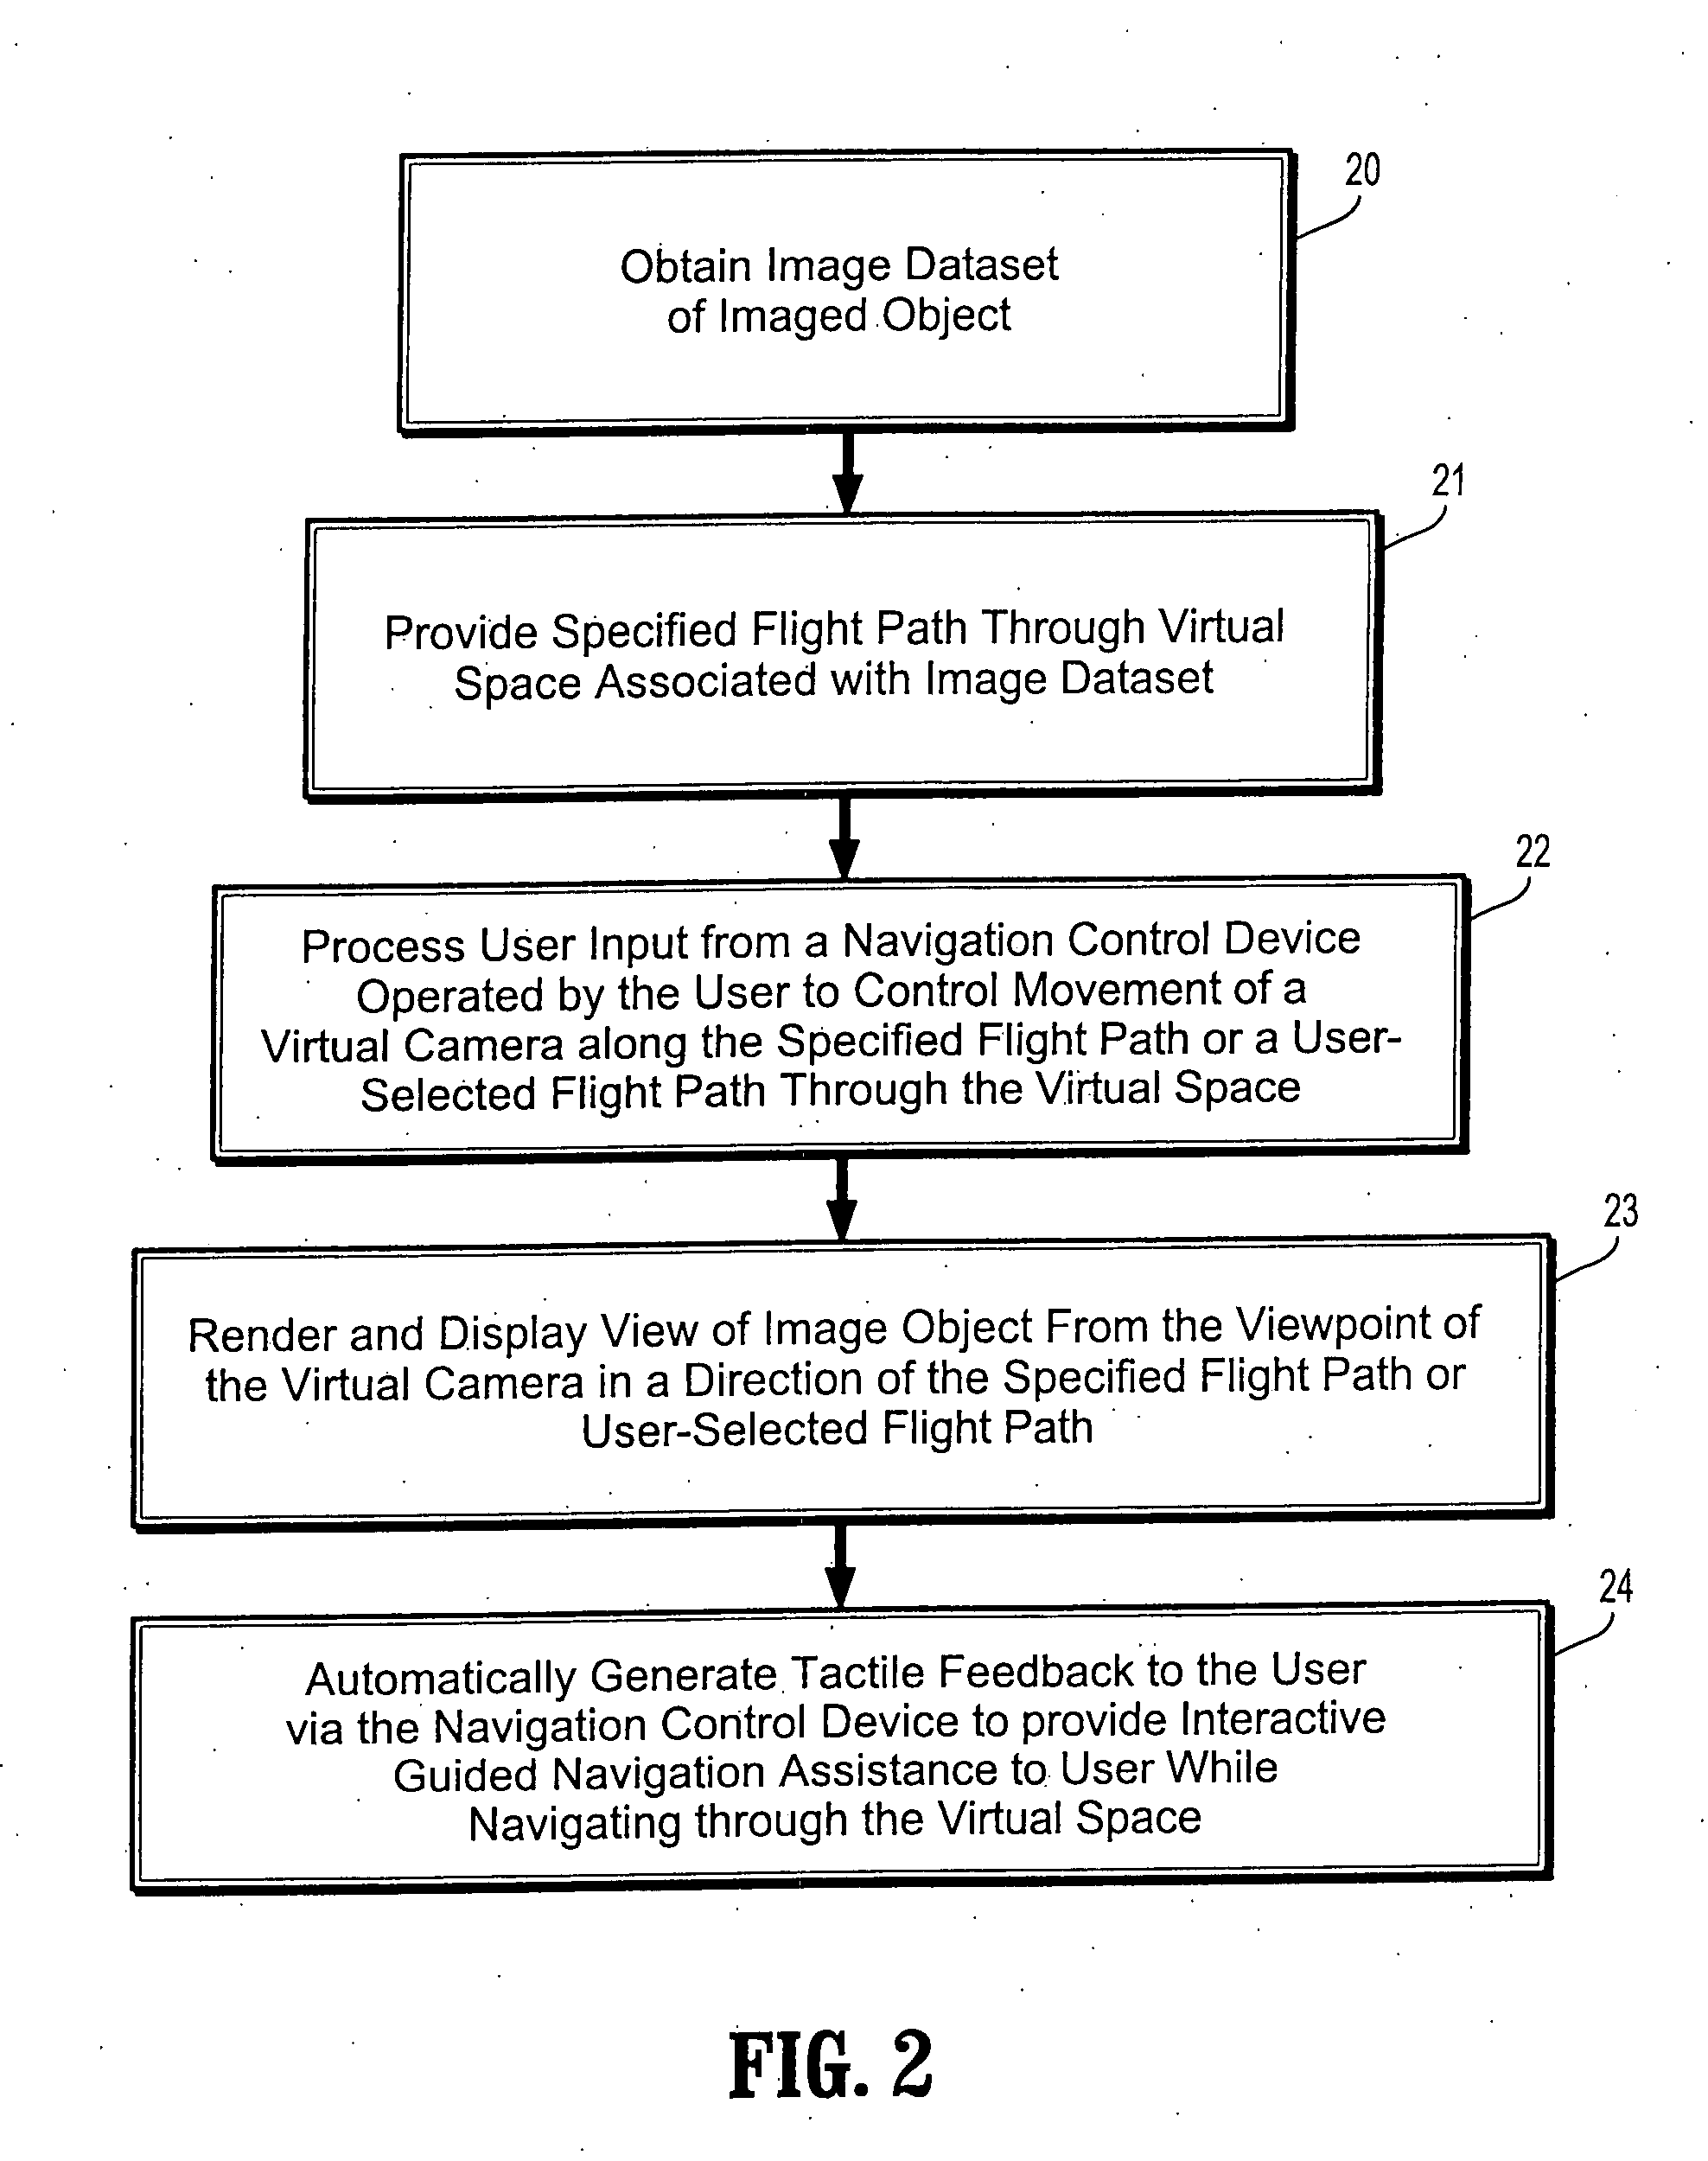 Systems and methods for interactive navigation and visualization of medical images